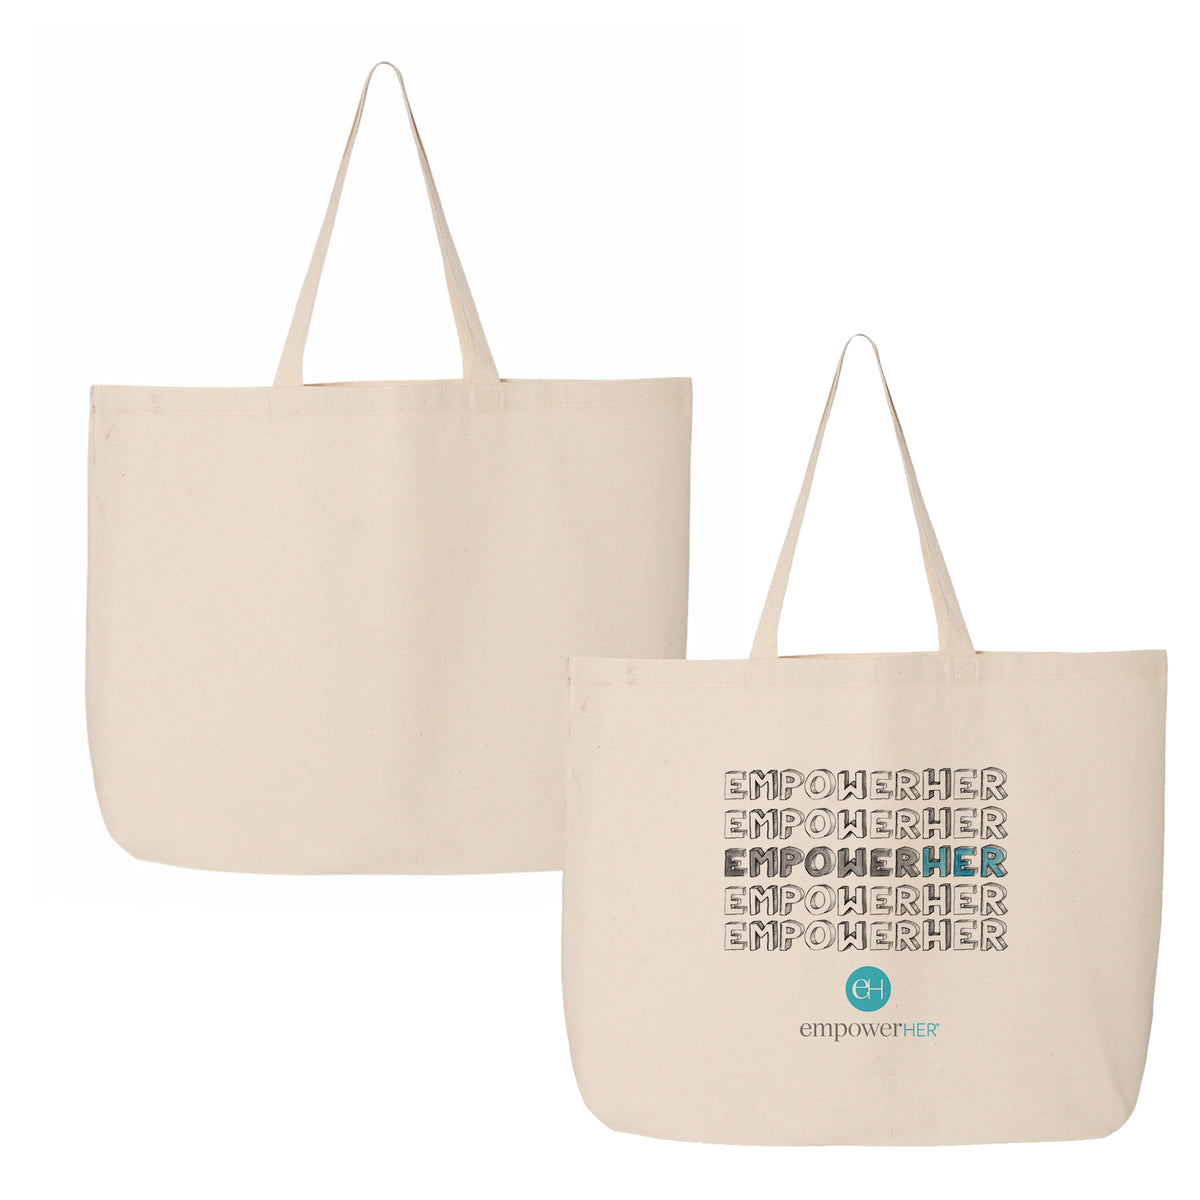 Tiny Turnip "EMPOWER HER" Canvas Tote Bag